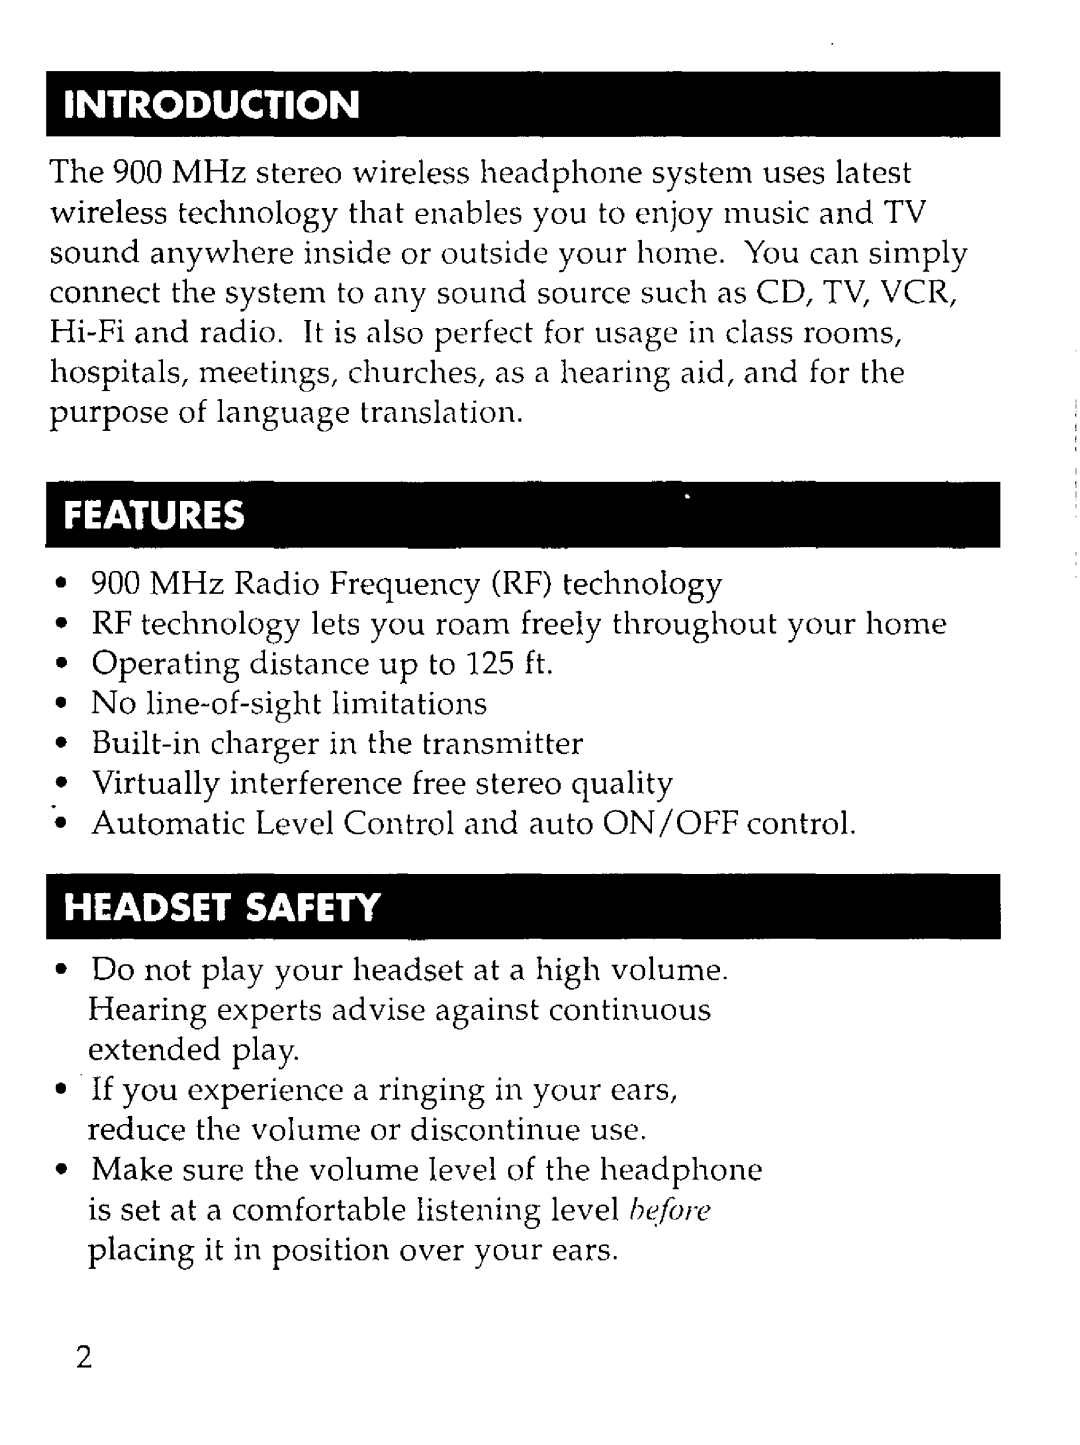 RCA WHP150 manual Introduction, Features, Headset Safety 